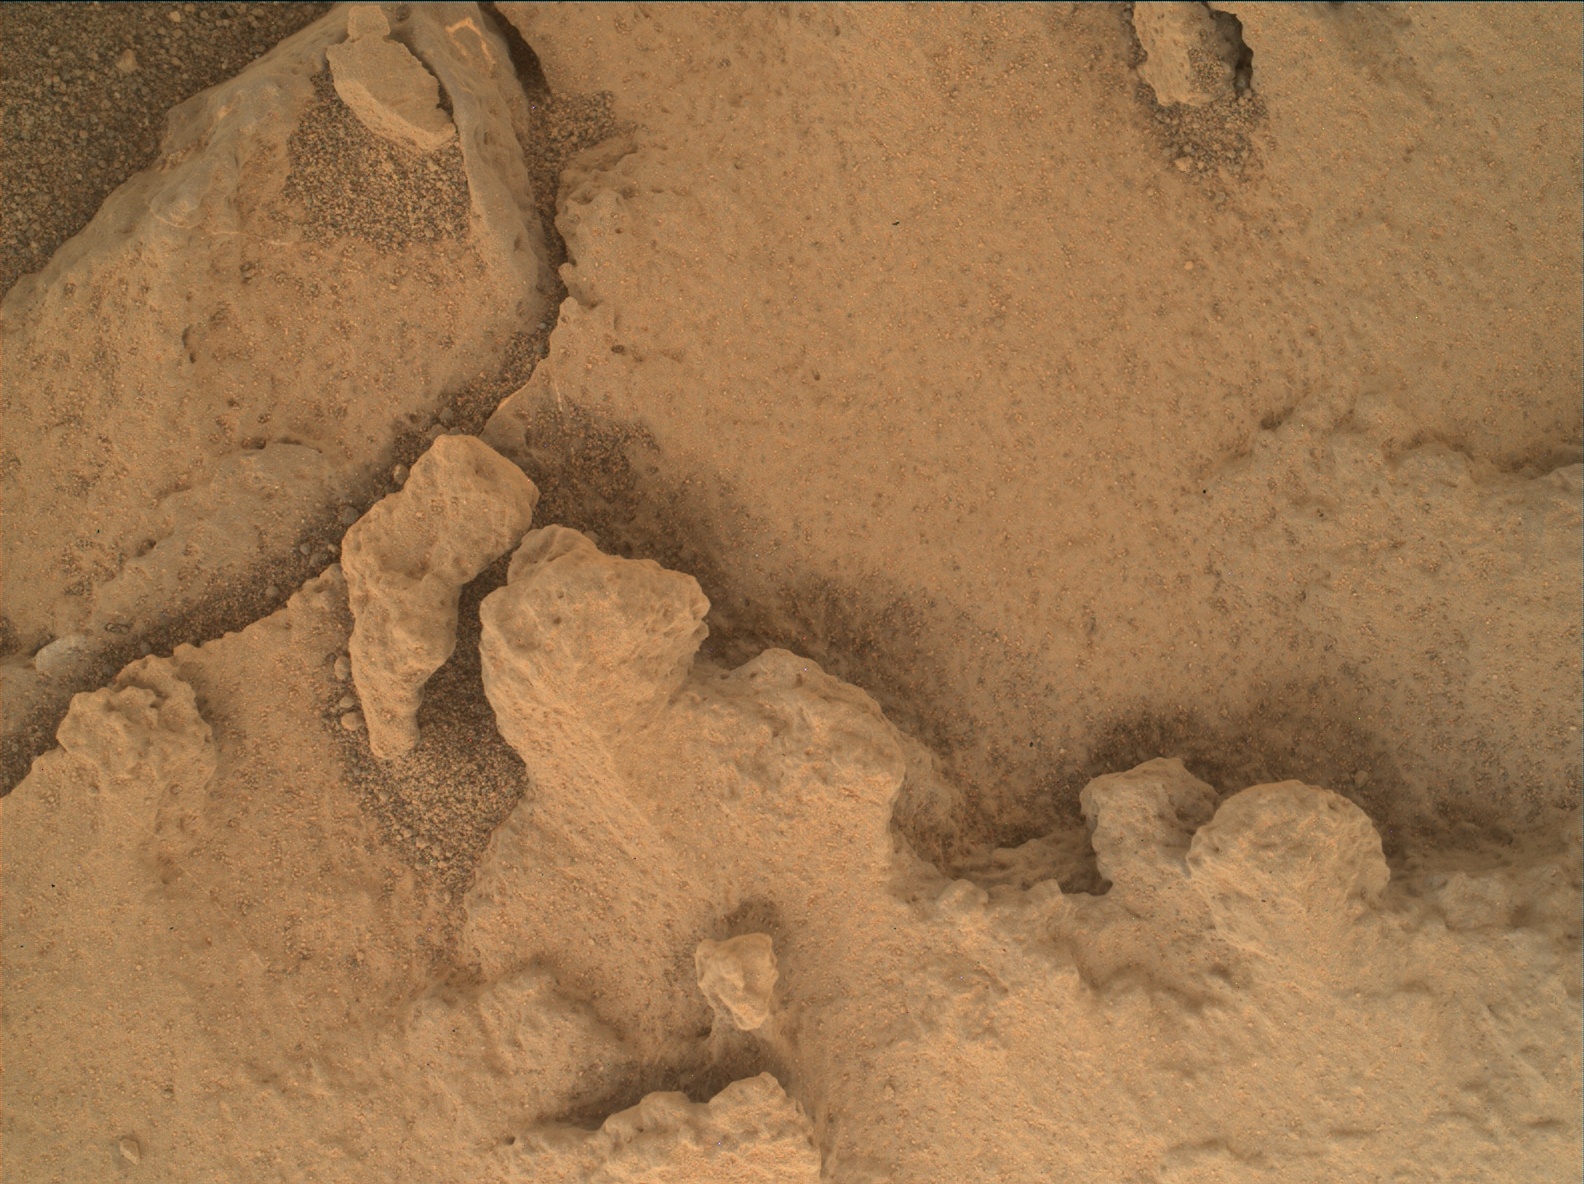 Nasa's Mars rover Curiosity acquired this image using its Mars Hand Lens Imager (MAHLI) on Sol 1371